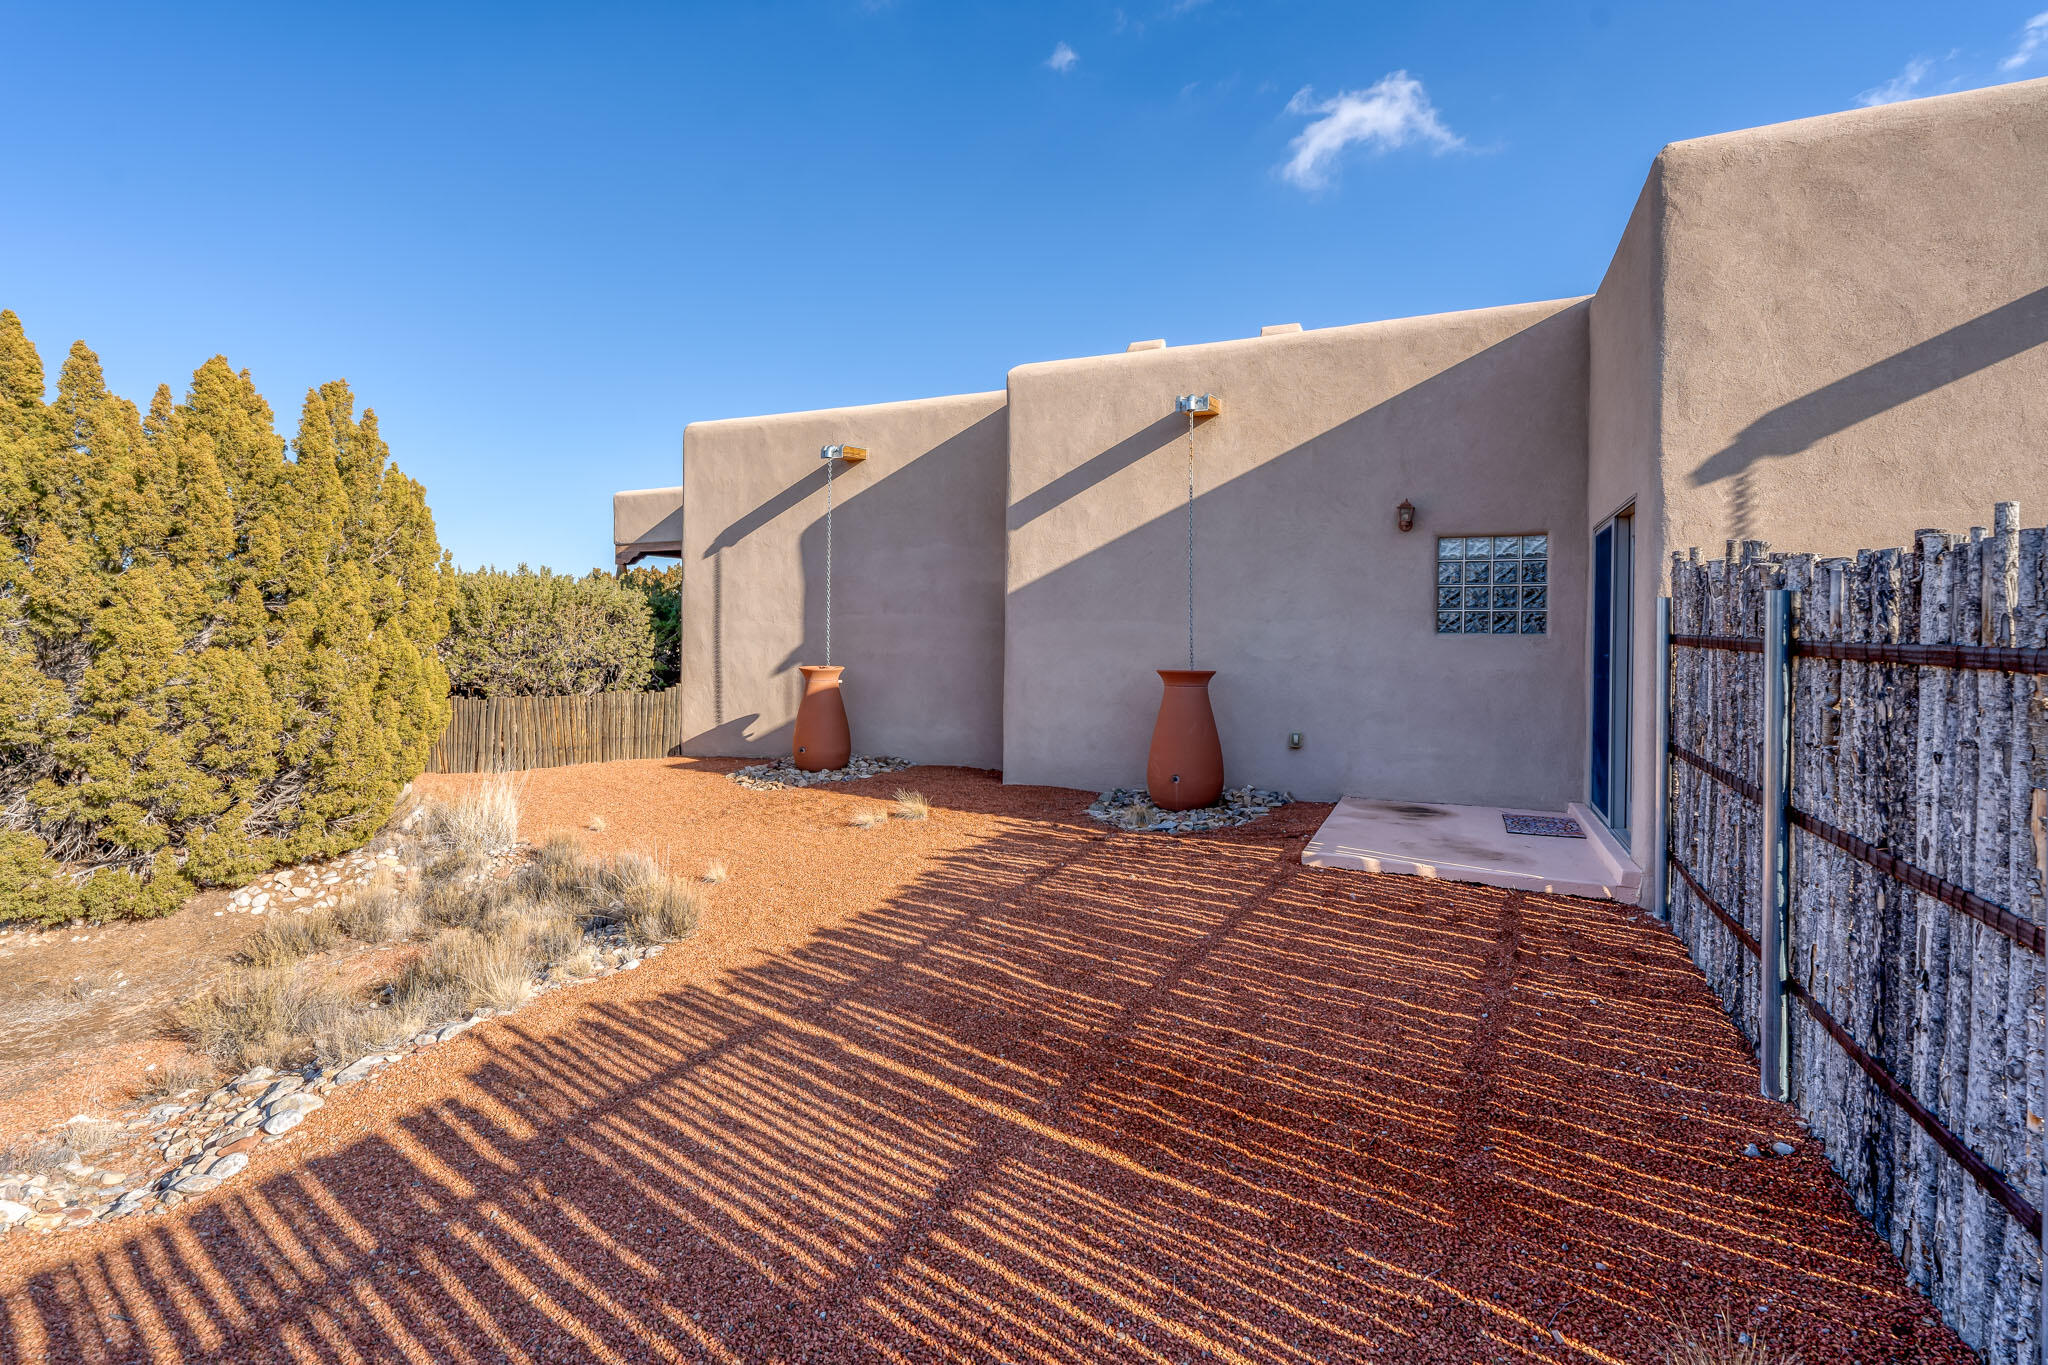 4 Tiwa Trail, Placitas, New Mexico 87043, 4 Bedrooms Bedrooms, ,3 BathroomsBathrooms,Residential,For Sale,4 Tiwa Trail,1054656